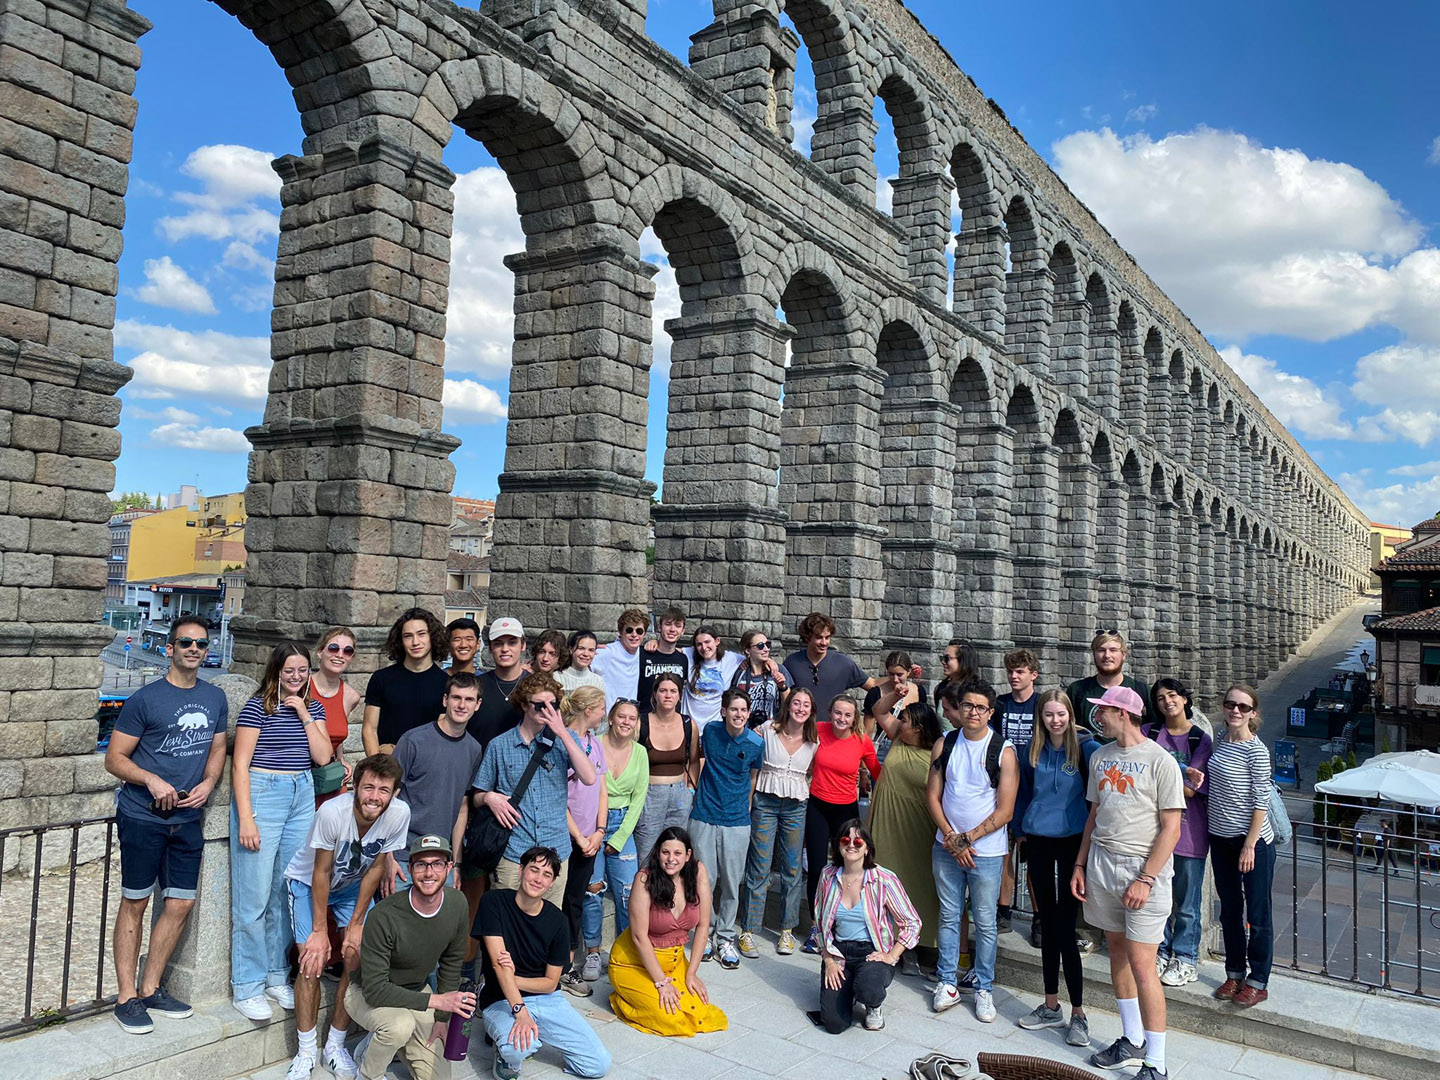 Colorado College students studying in Spain are pictured in front of an ancient Roman aqueduct, which was likely built near the end of the 1st century. Photo by Carrie Ruiz